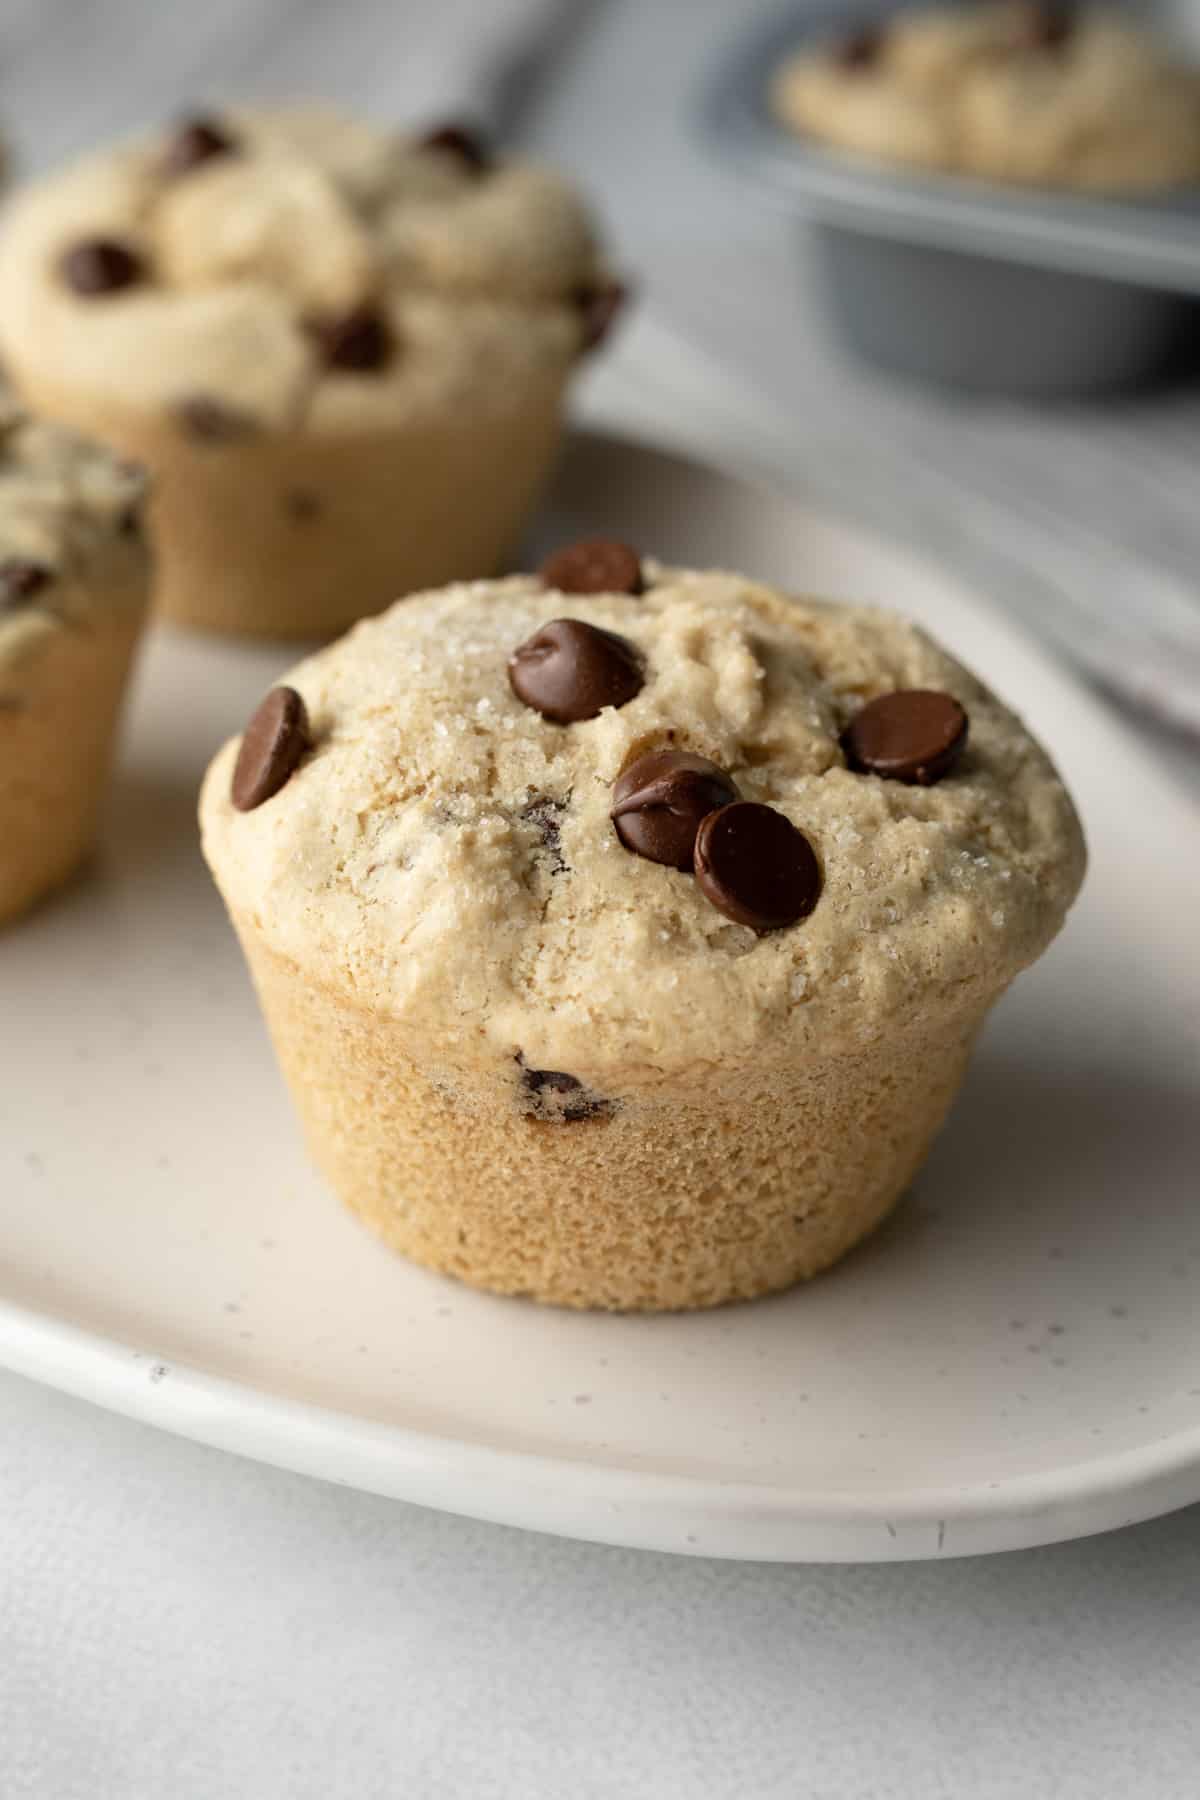 Muffins made with gluten free flour and chocolate chips instead of blueberries.